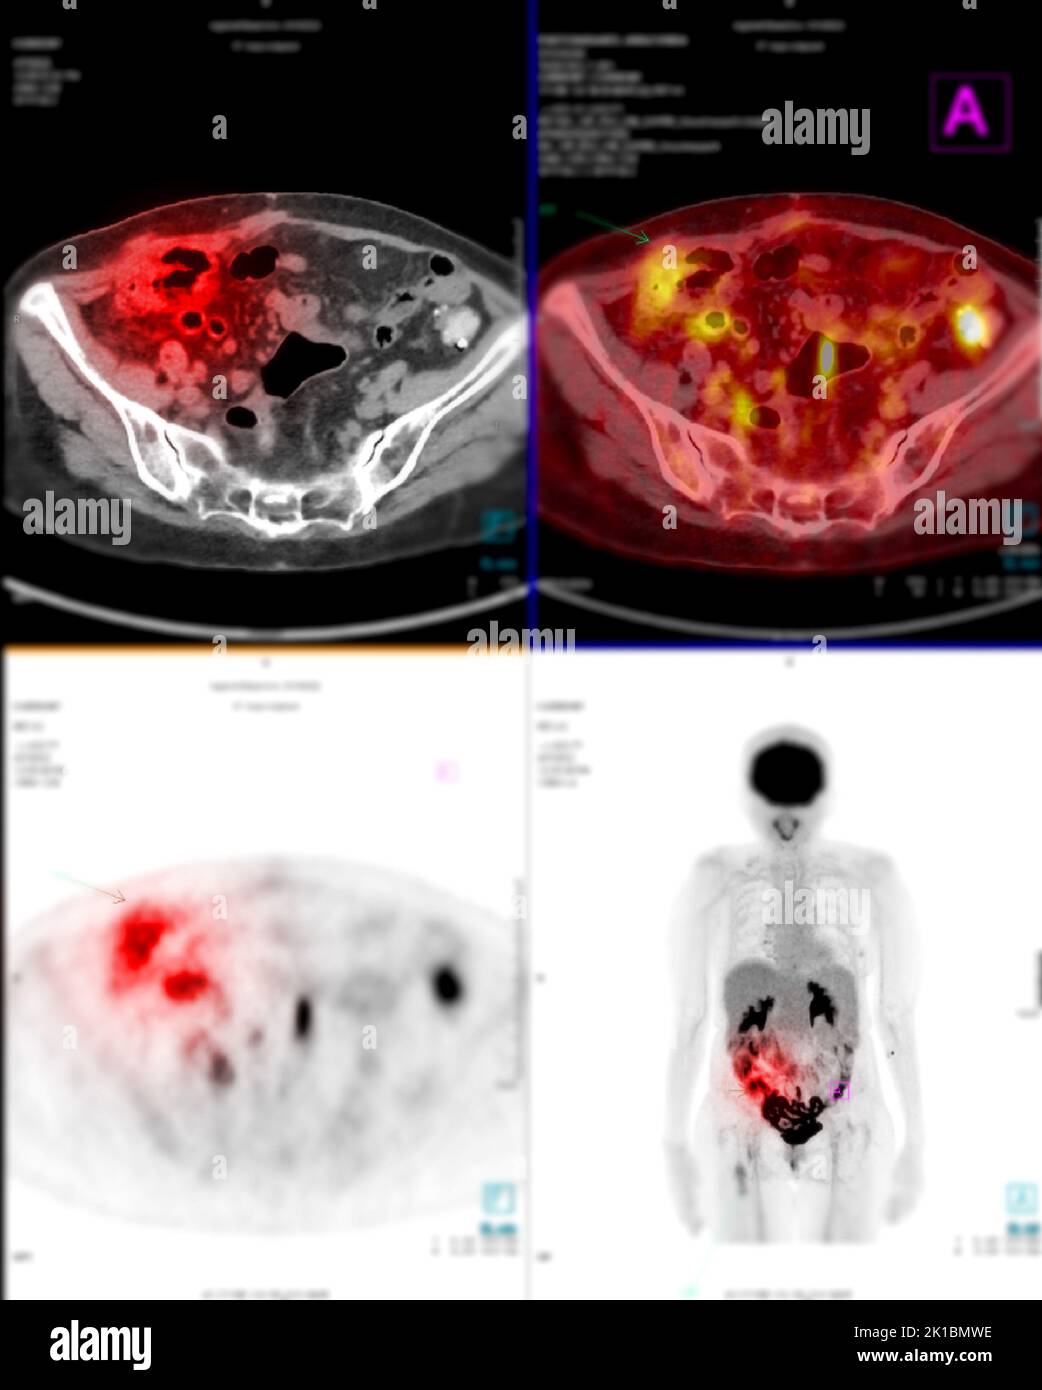 https://c8.alamy.com/comp/2K1BMWE/positron-emission-tomography-pet-ct-scan-uses-a-radioactive-drug-tracer-to-show-both-normal-and-abnormal-metabolic-activity-of-whole-human-body-2K1BMWE.jpg